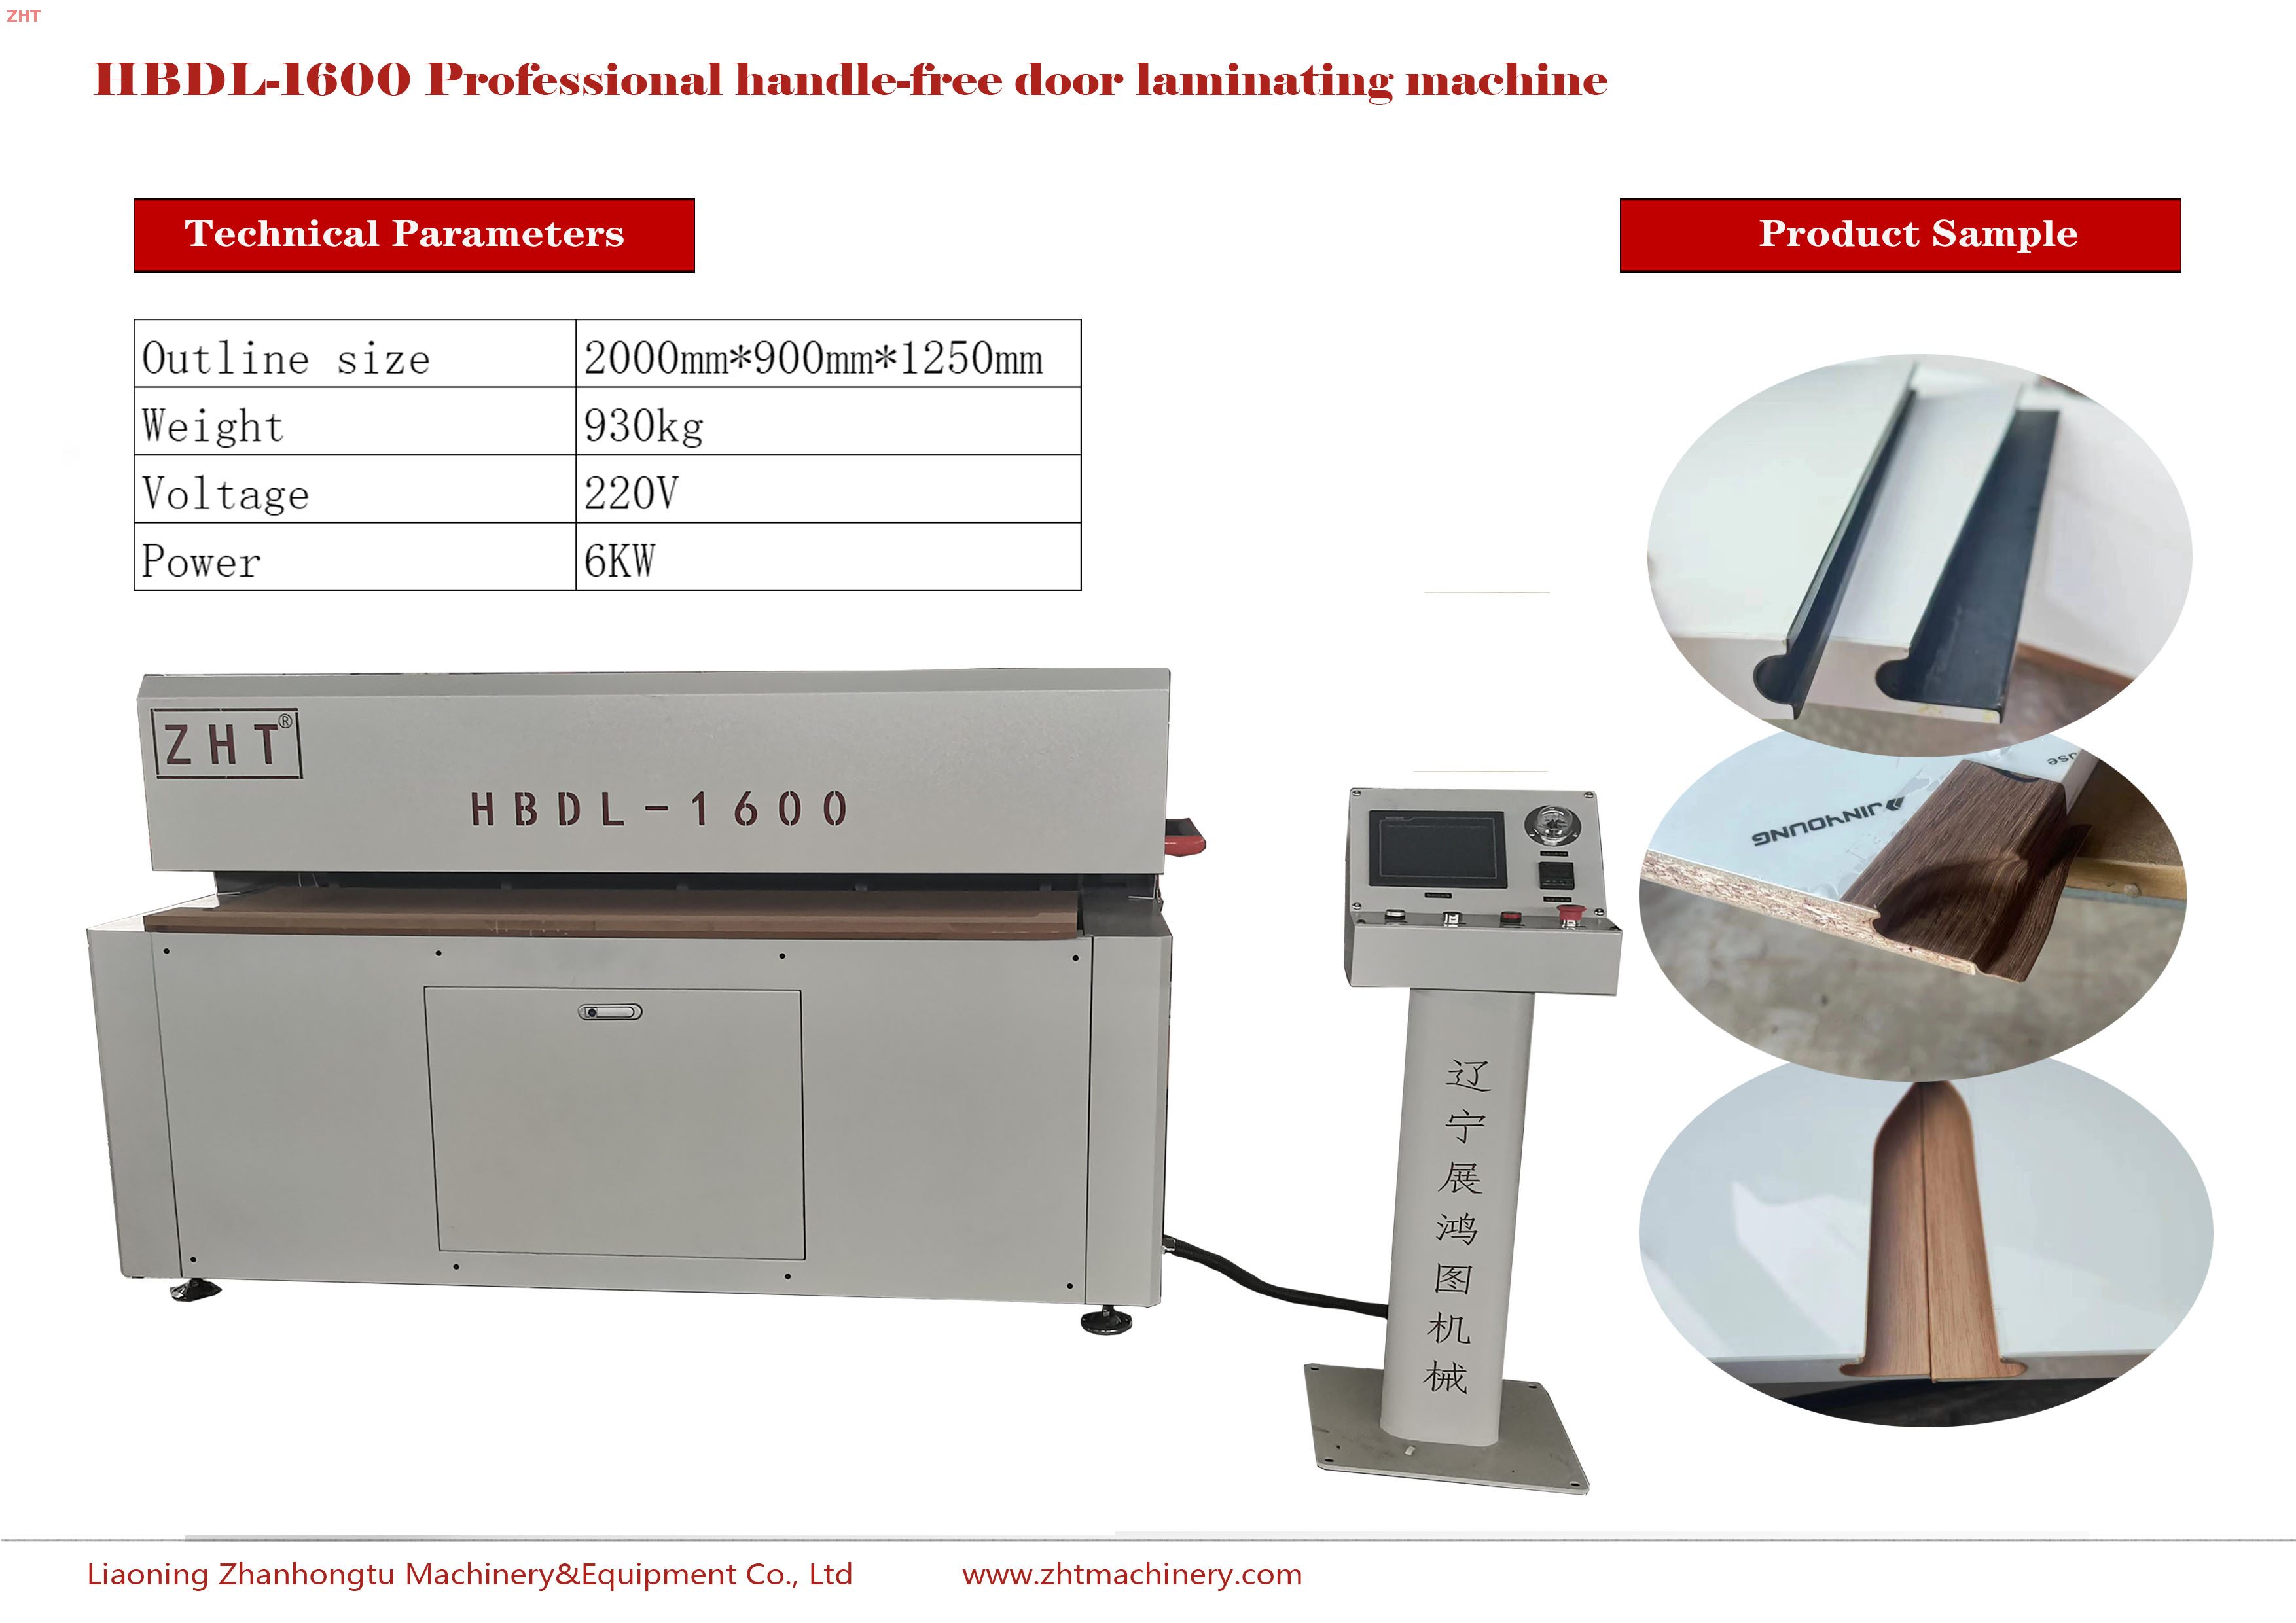 Economic Model HBDL-1600 for Handle-free Workpieces of Wooden Materials 